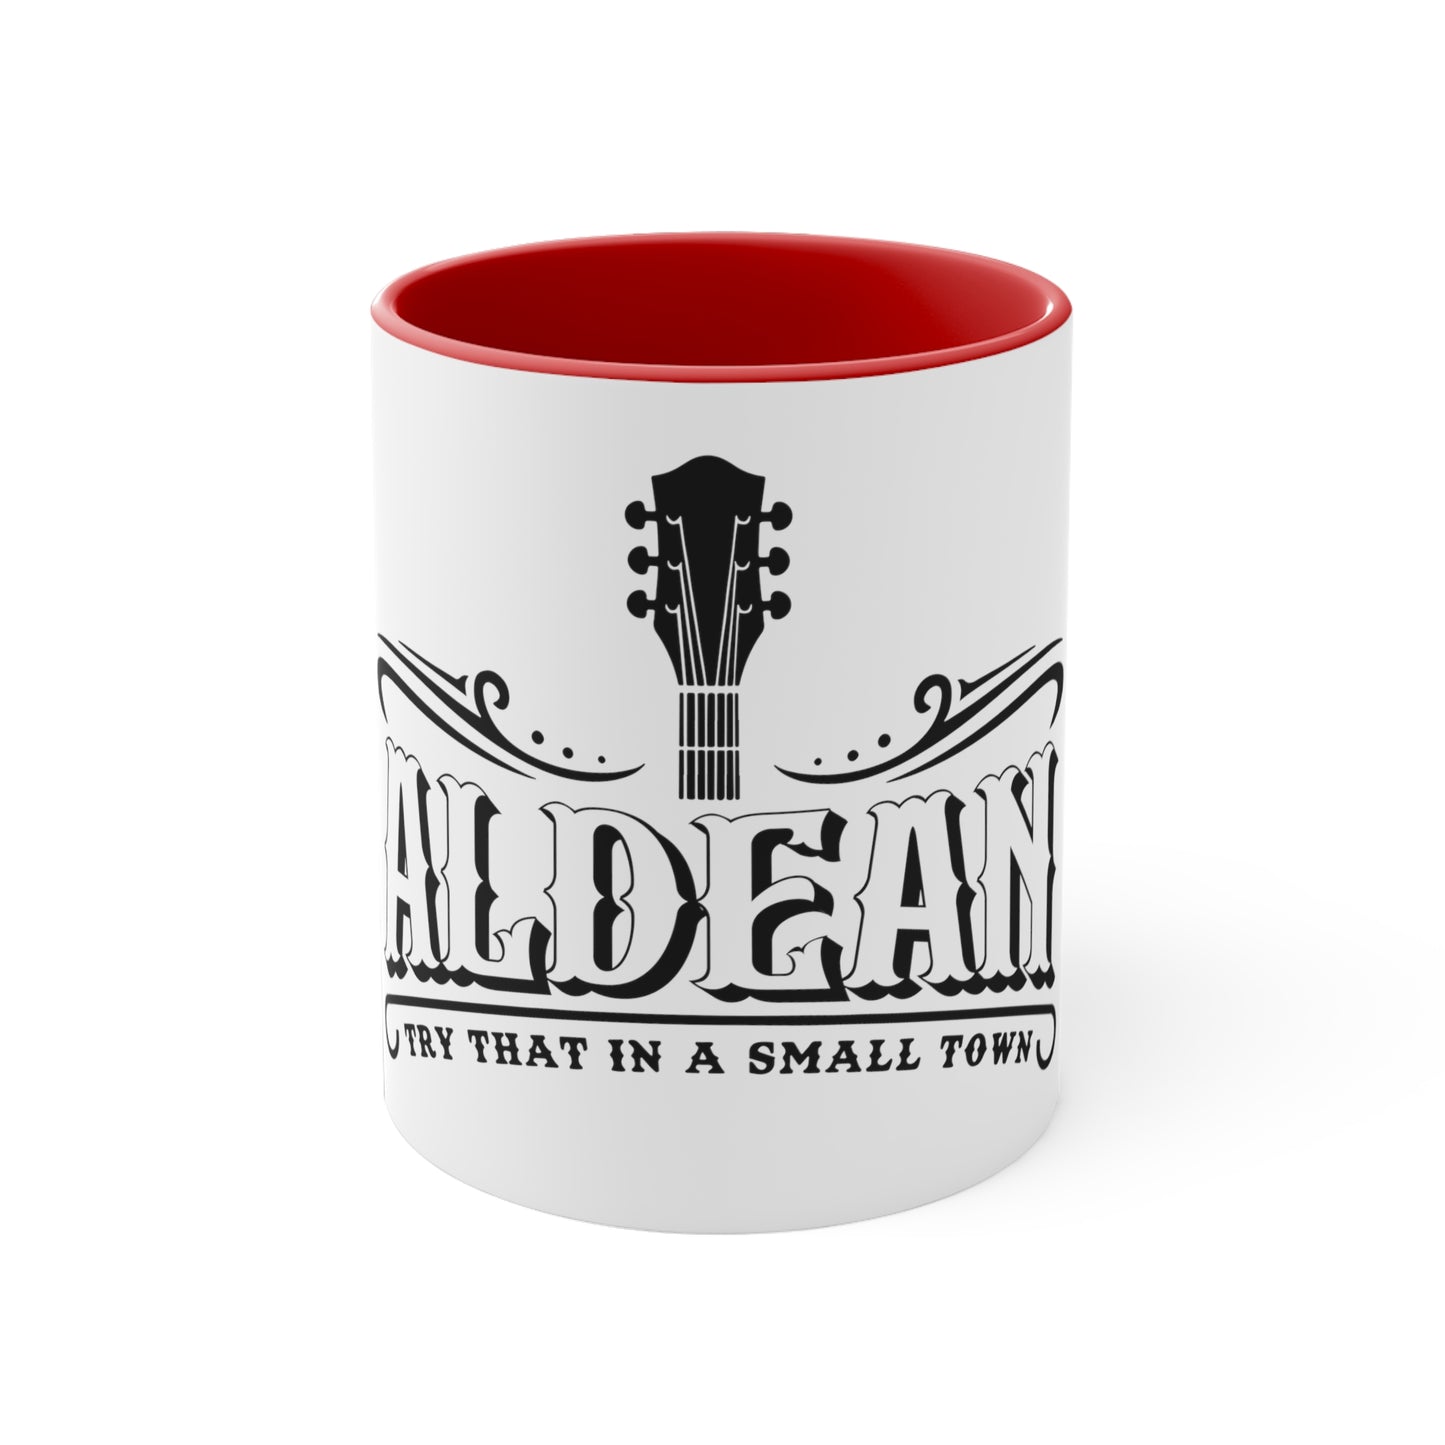 Try that in a small town guitar Accent Coffee Mug, 11oz - Red / 11oz